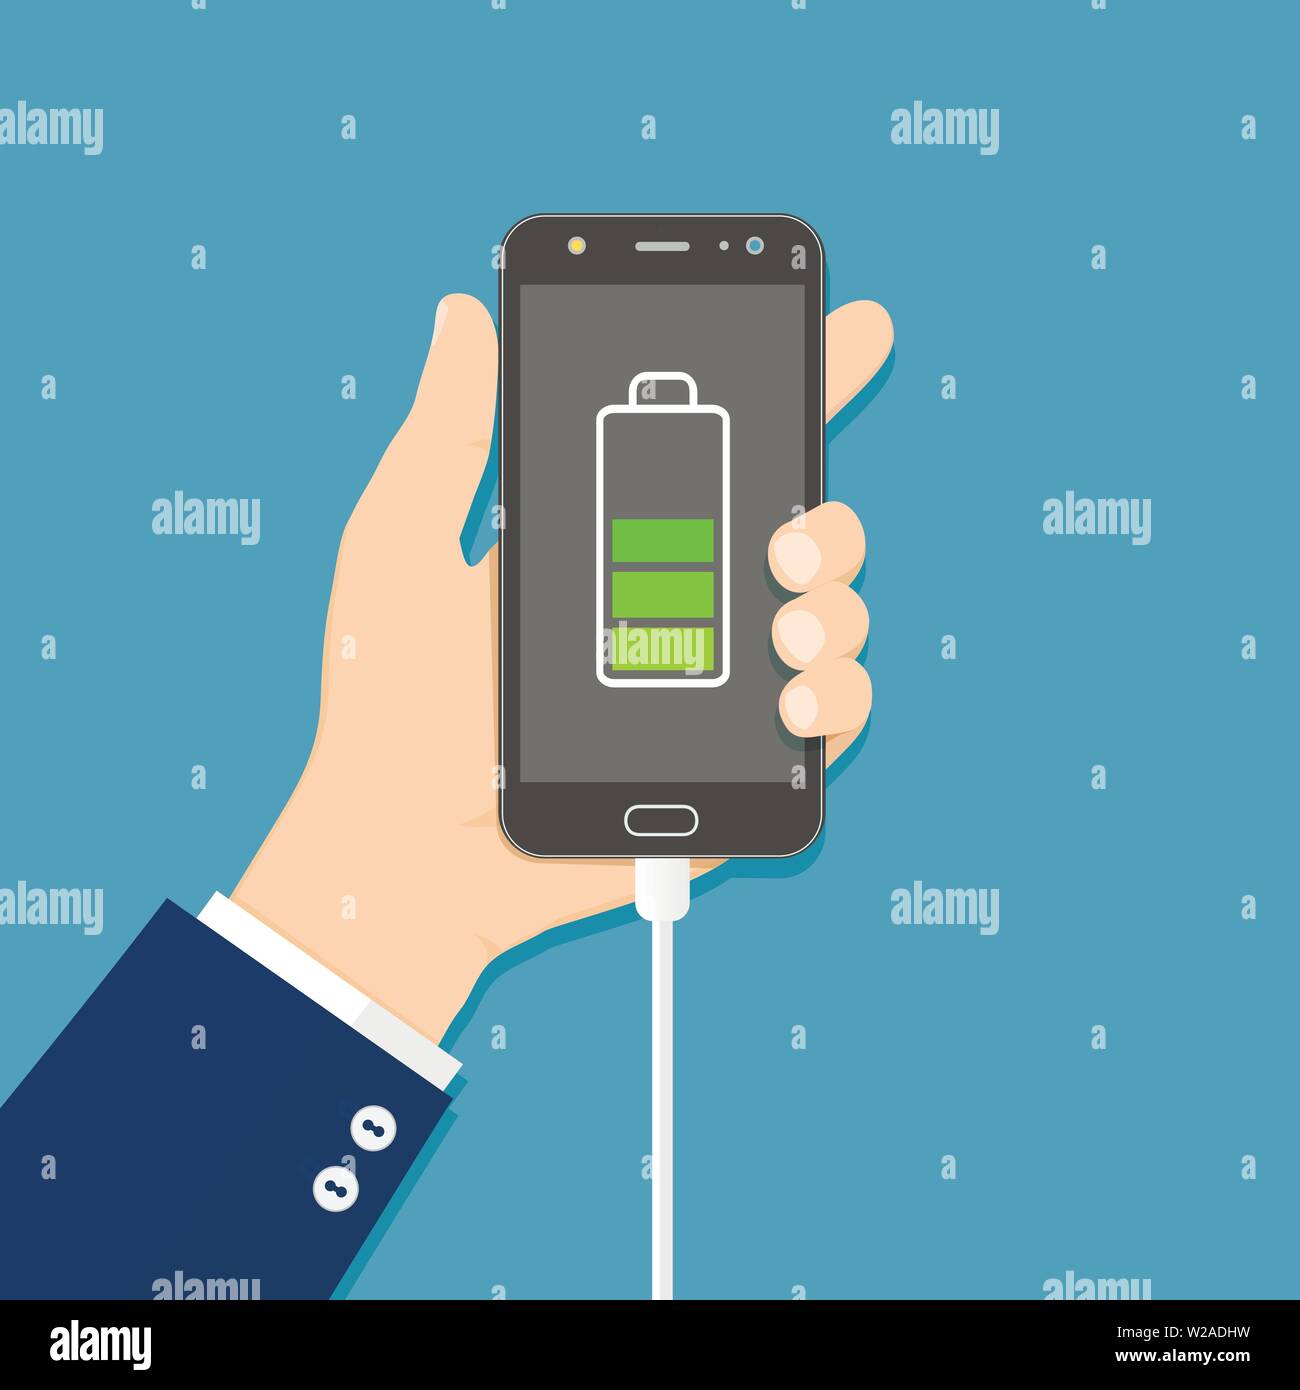 Human hand holding mobile phone with charger connected Stock Vector